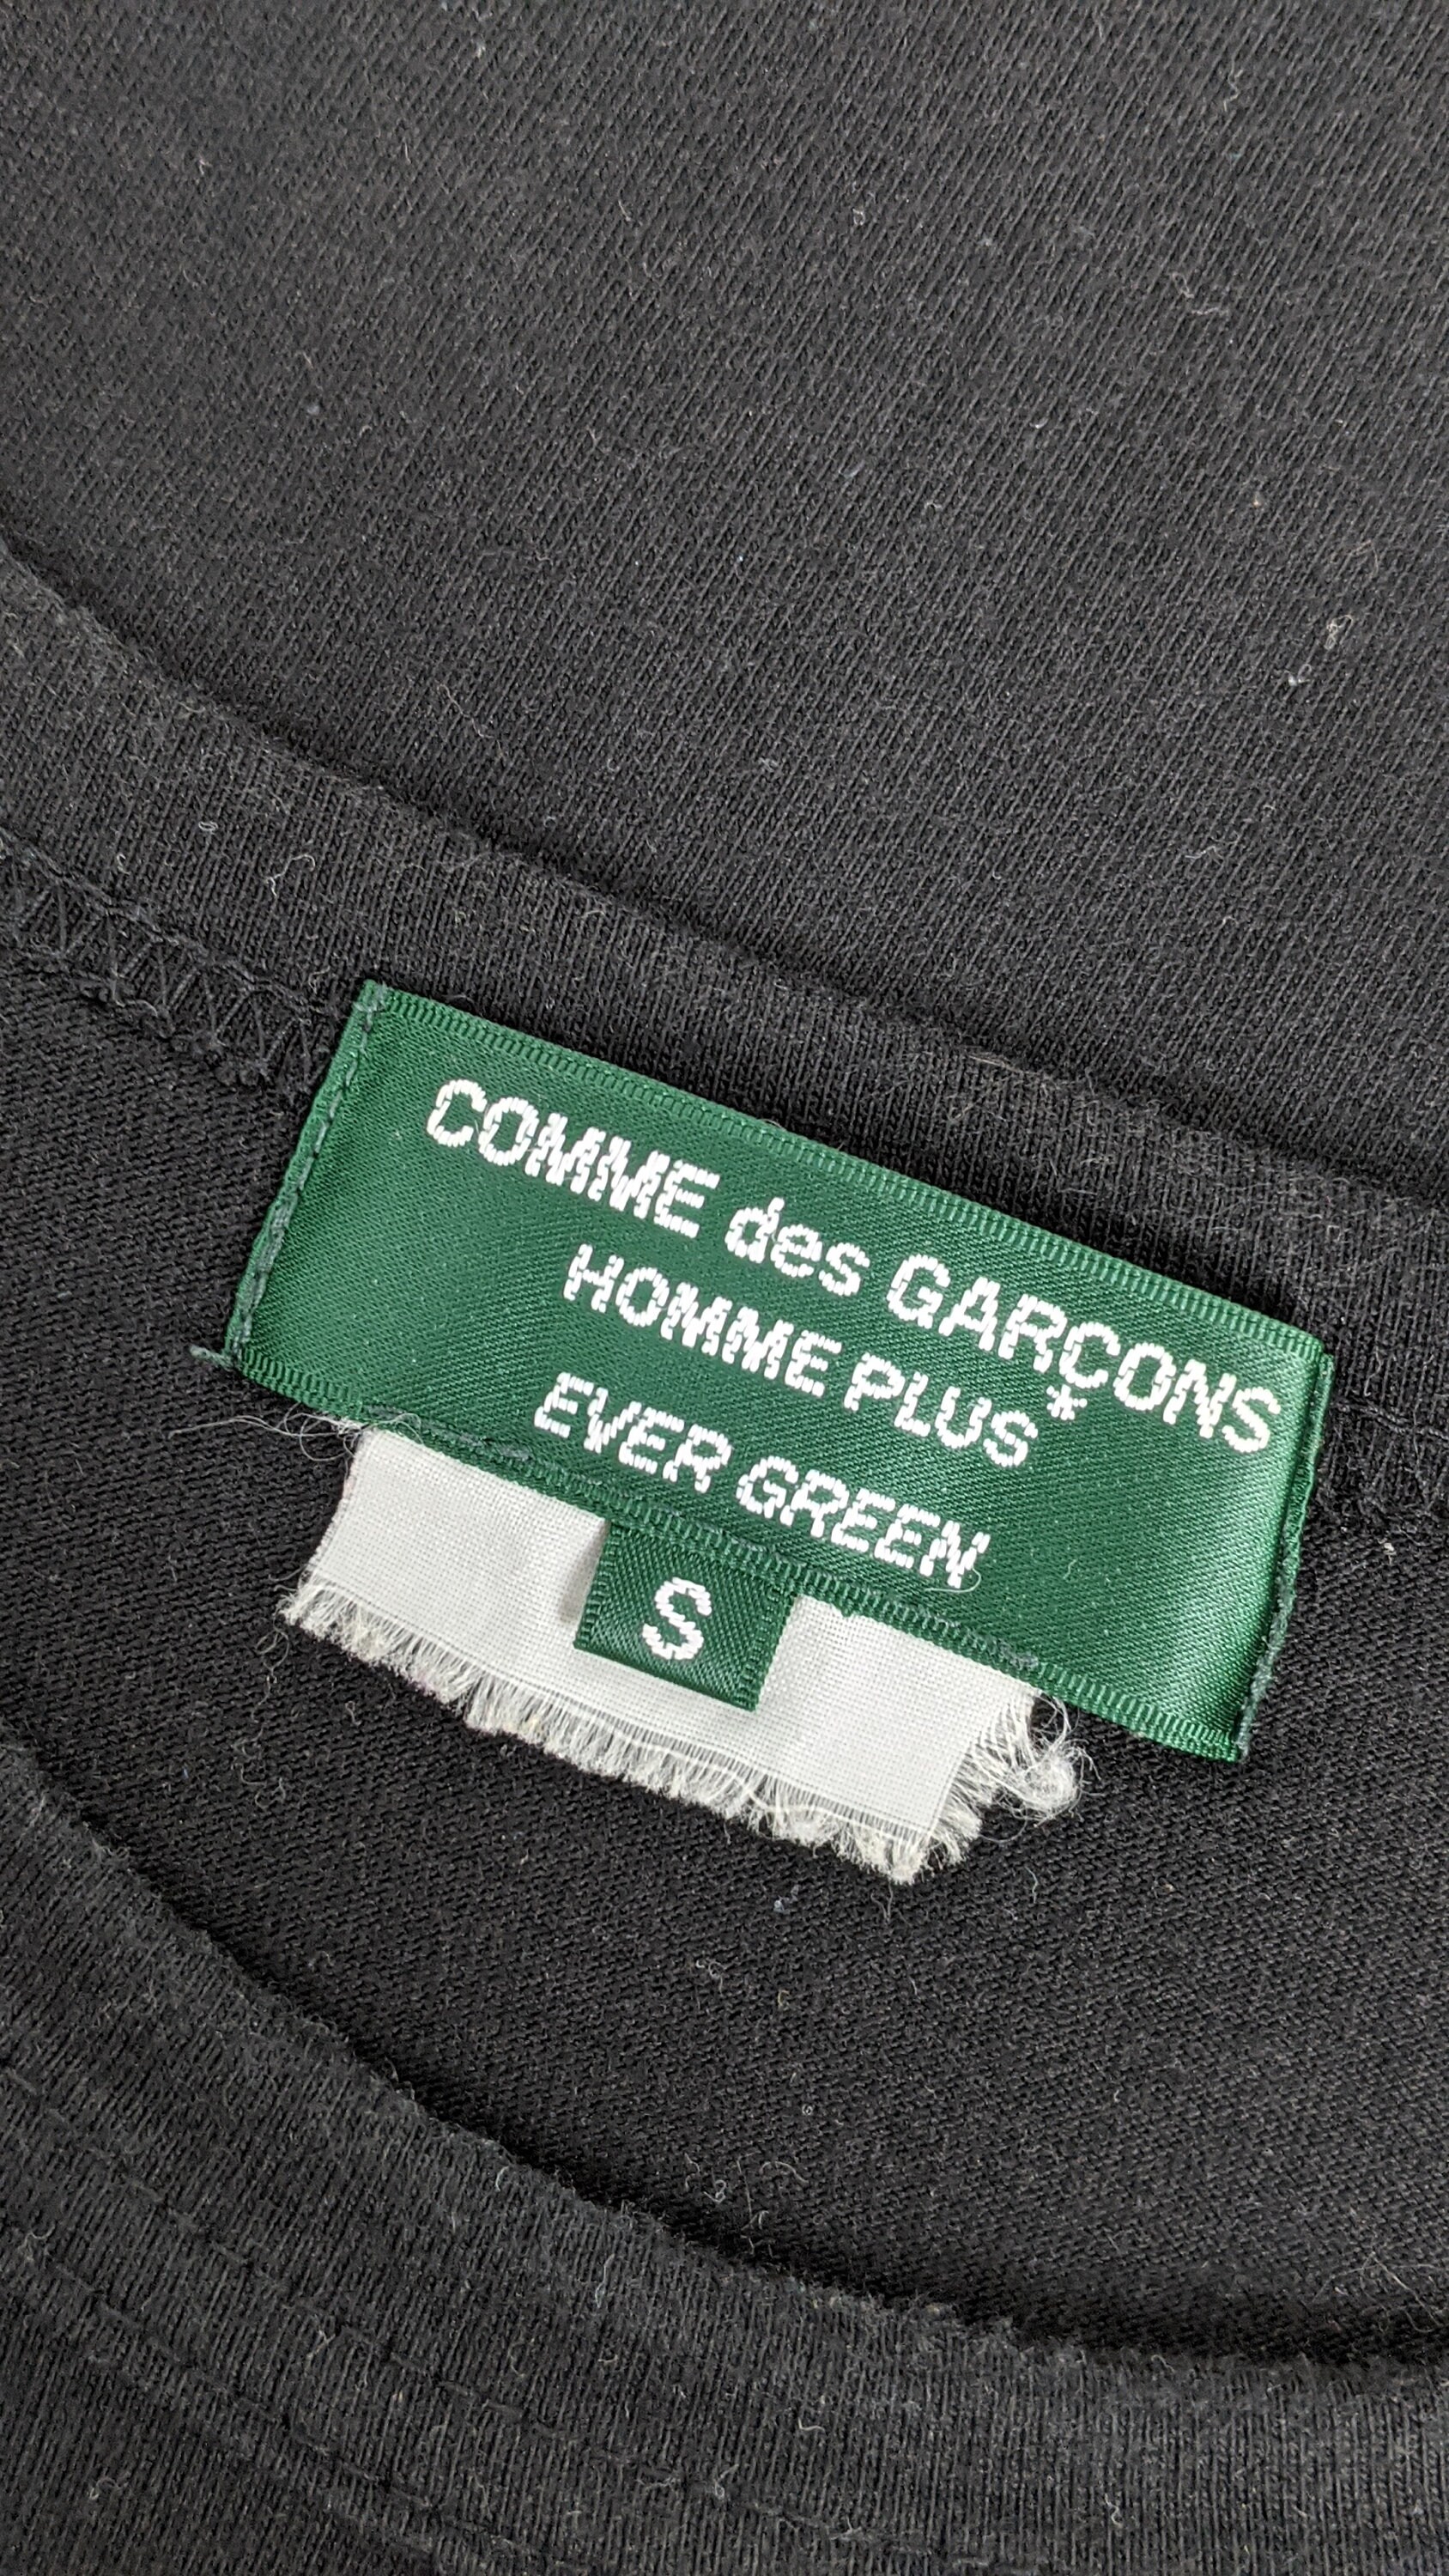 Comme Des Garcons Homme Plus Evergreen Pink Panther Shirt Size S